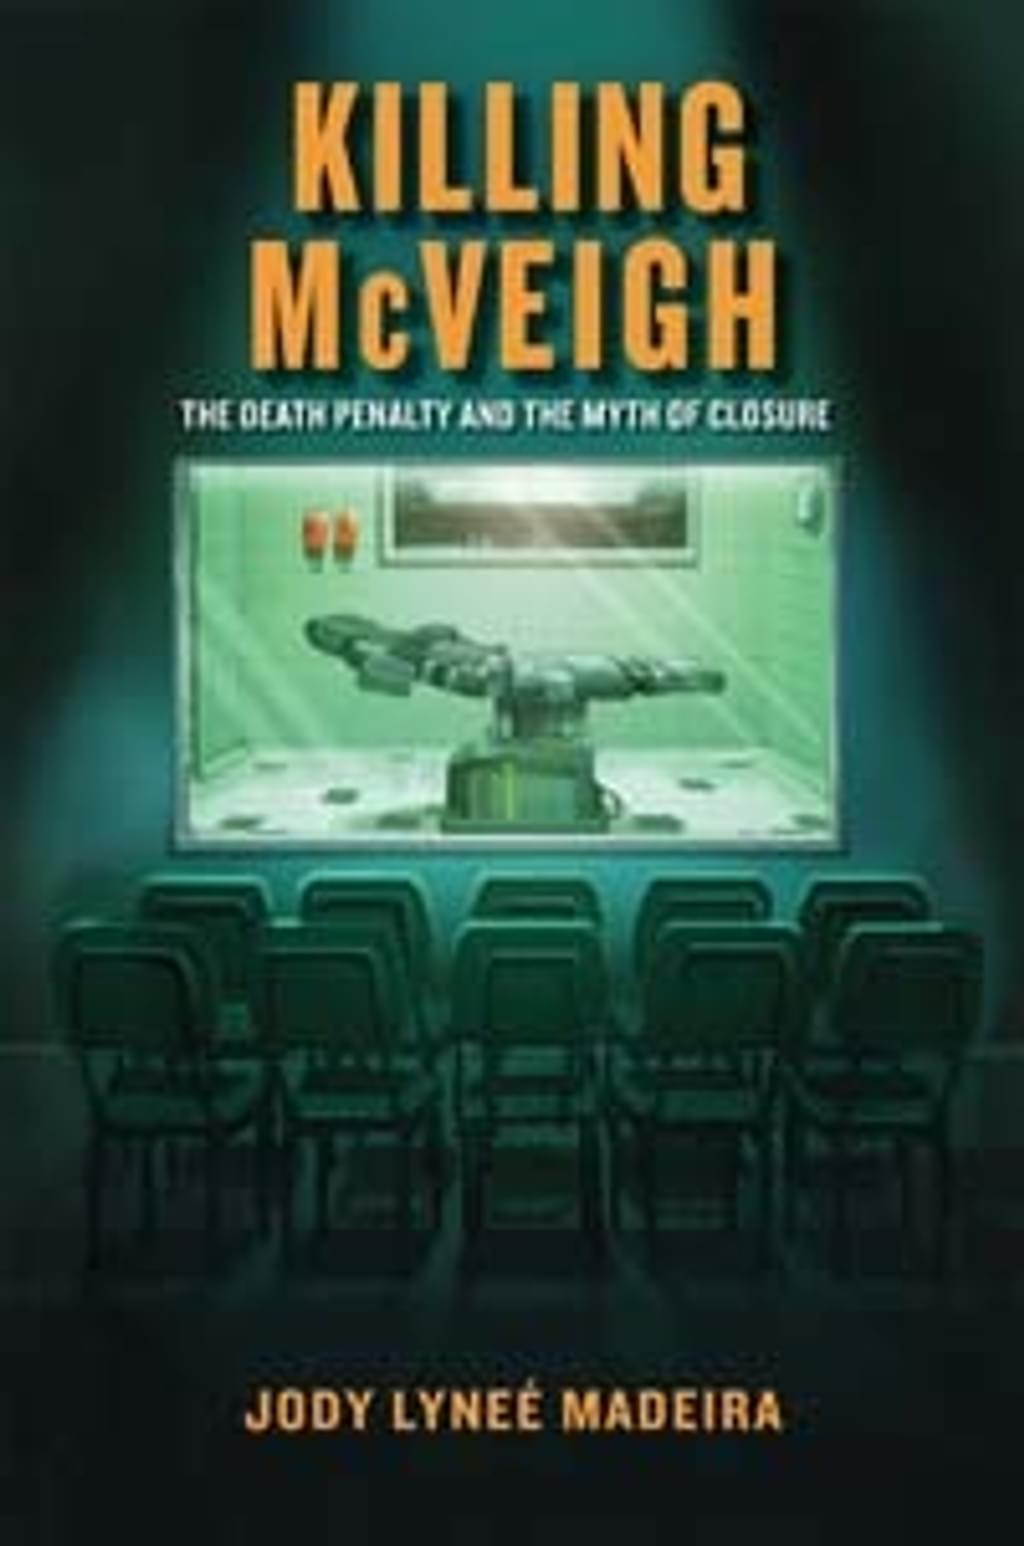 BOOKS: "Killing McVeigh: The Death Penalty and the Myth of Closure"